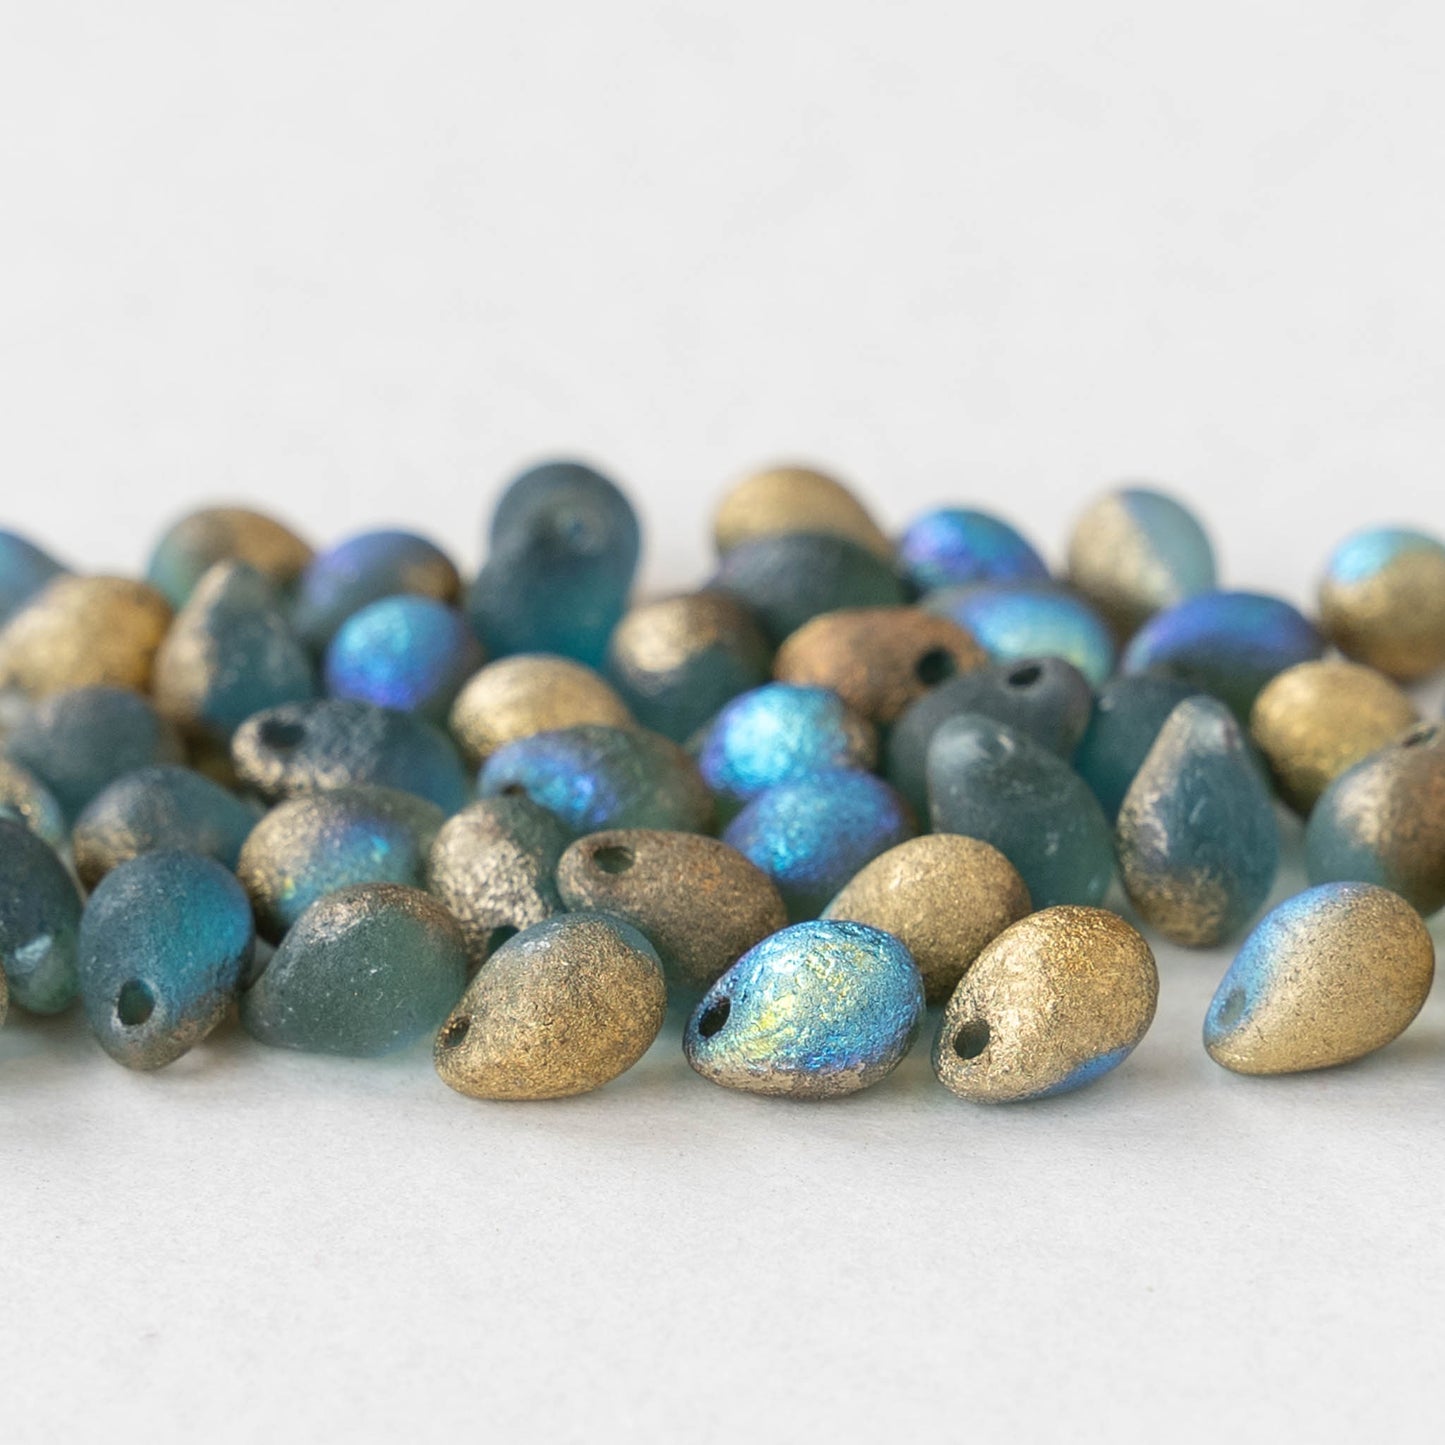 5x7mm Glass Teardrop Beads - Sky Blue and Gold Etched - 50 Beads